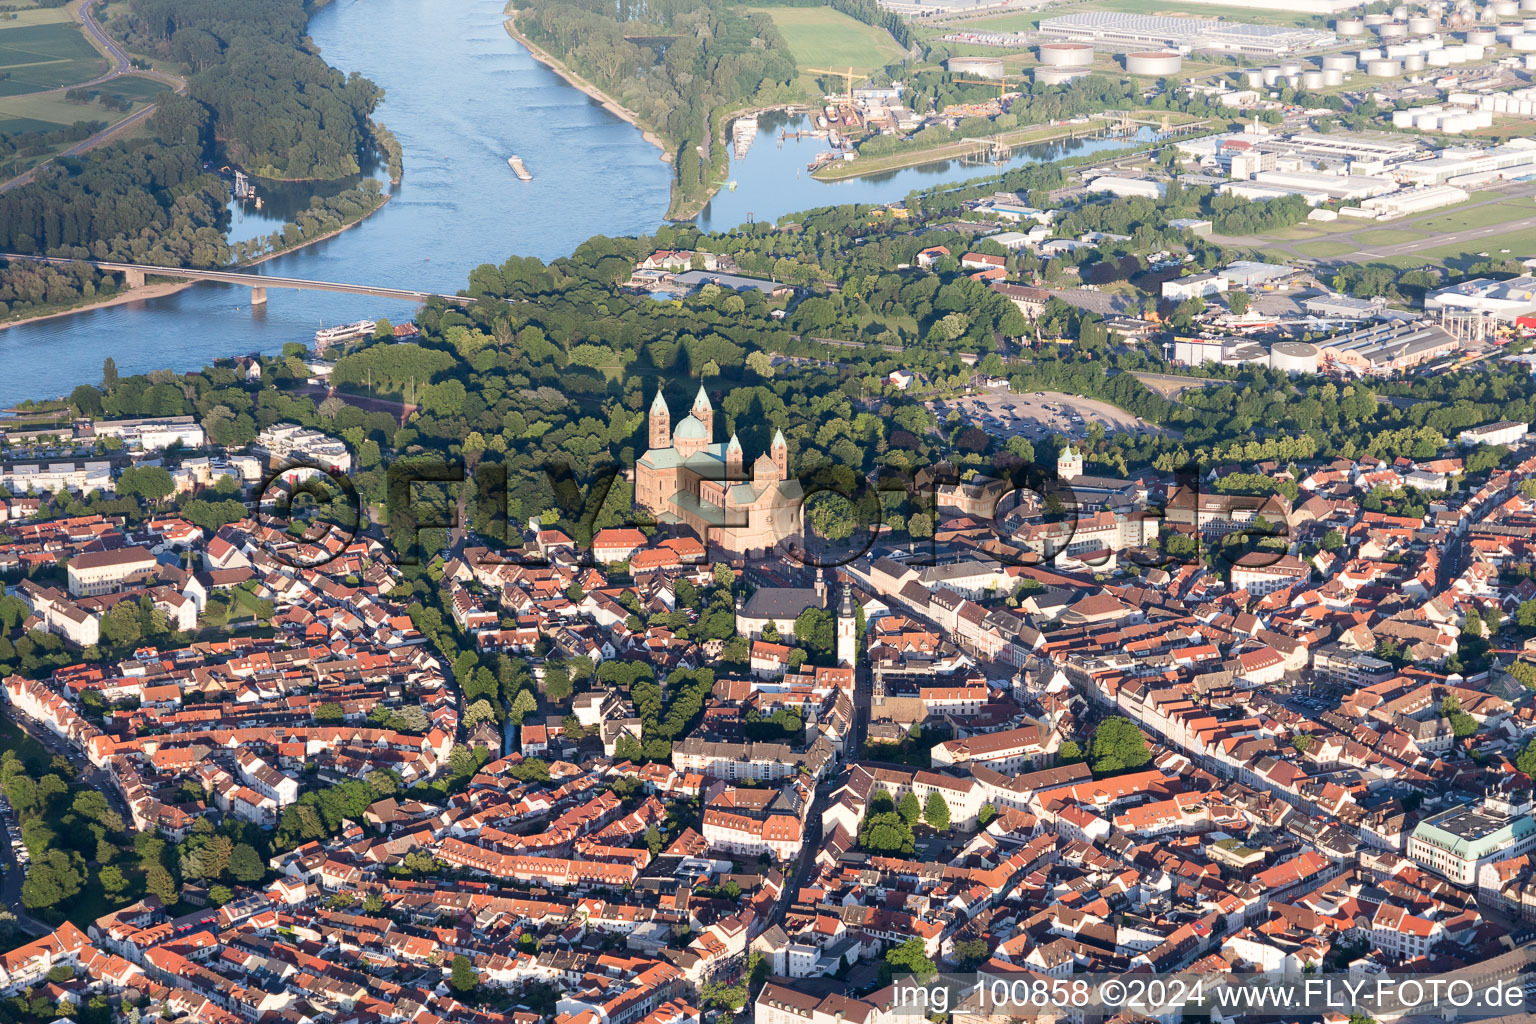 Aerial view of Church building of the cathedral of of Dom zu Speyer in Speyer in the state Rhineland-Palatinate, Germany